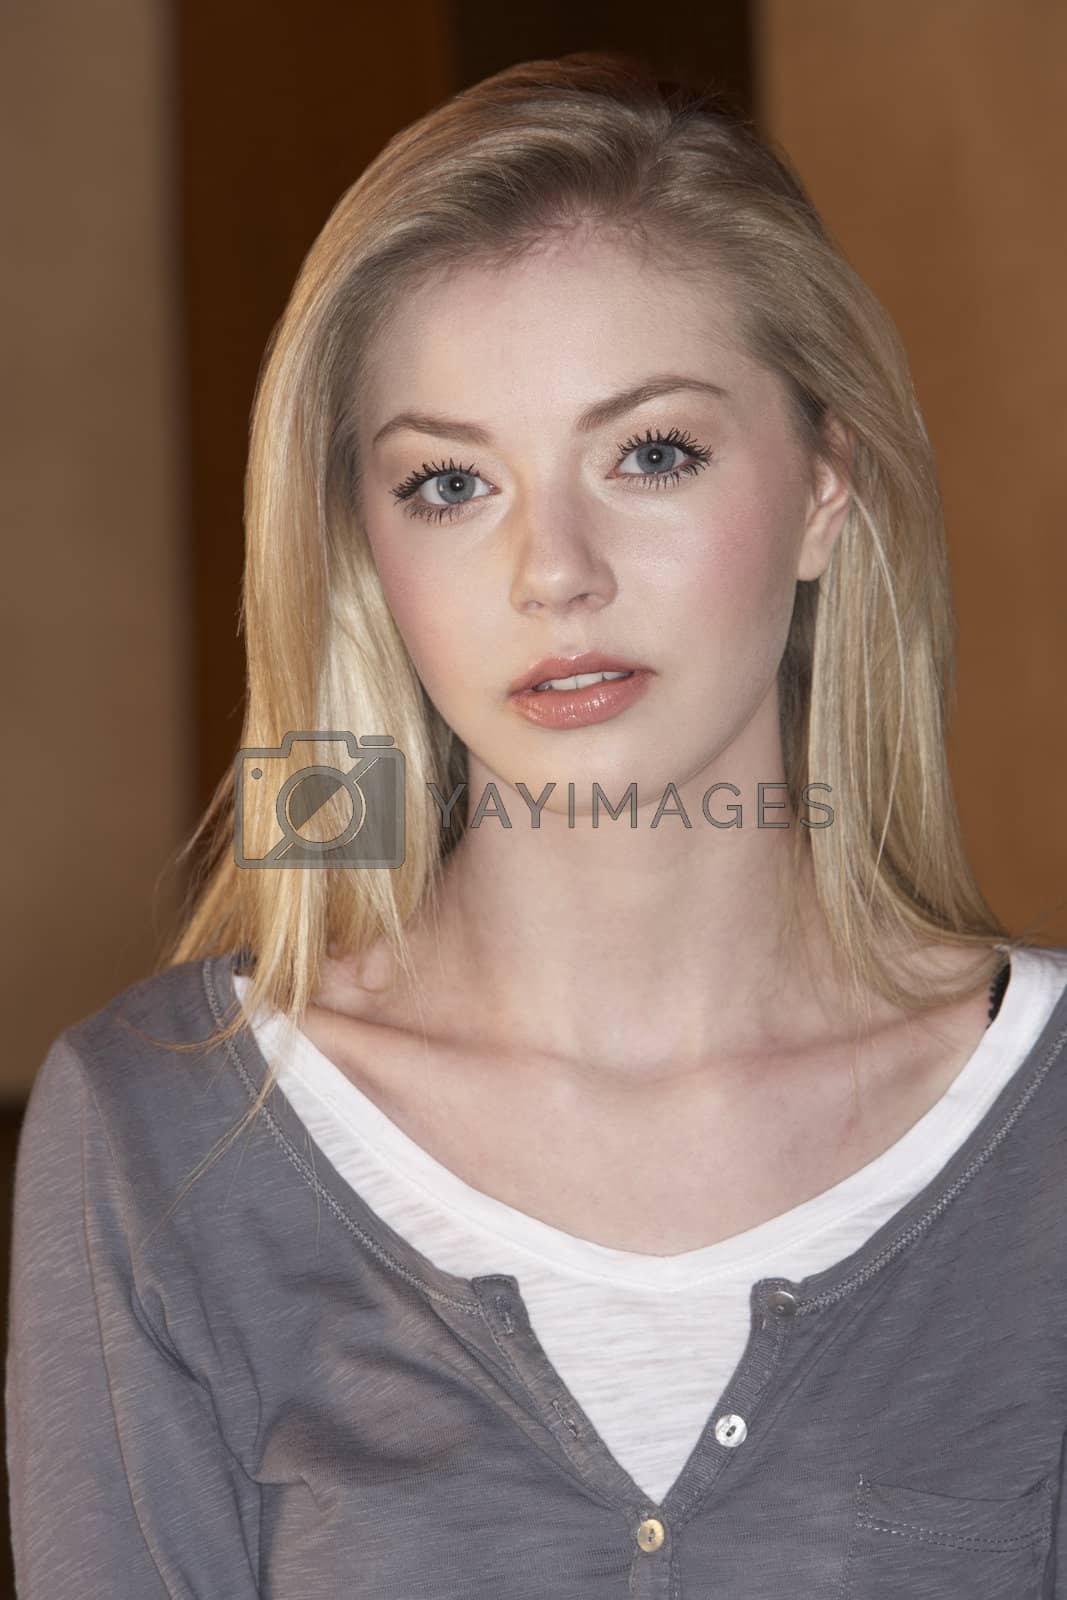 Royalty free image of Portrait of young woman by omg_images